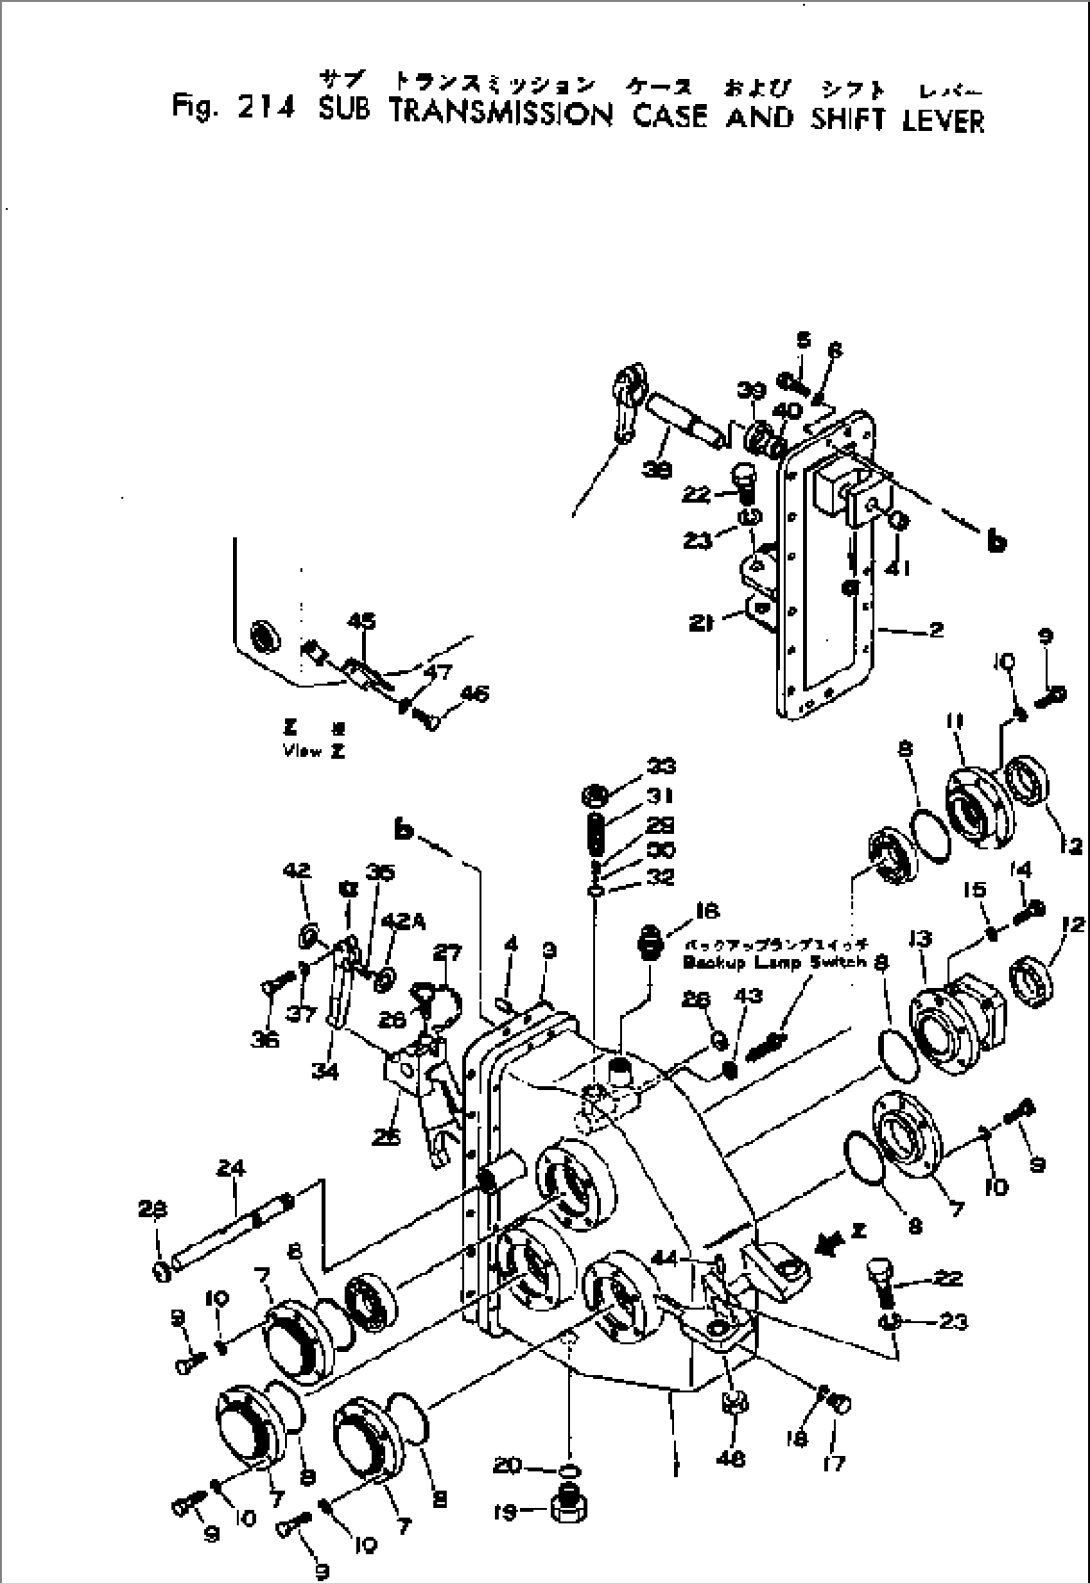 SUB TRANSMISSION CASE AND SHIFT LEVER